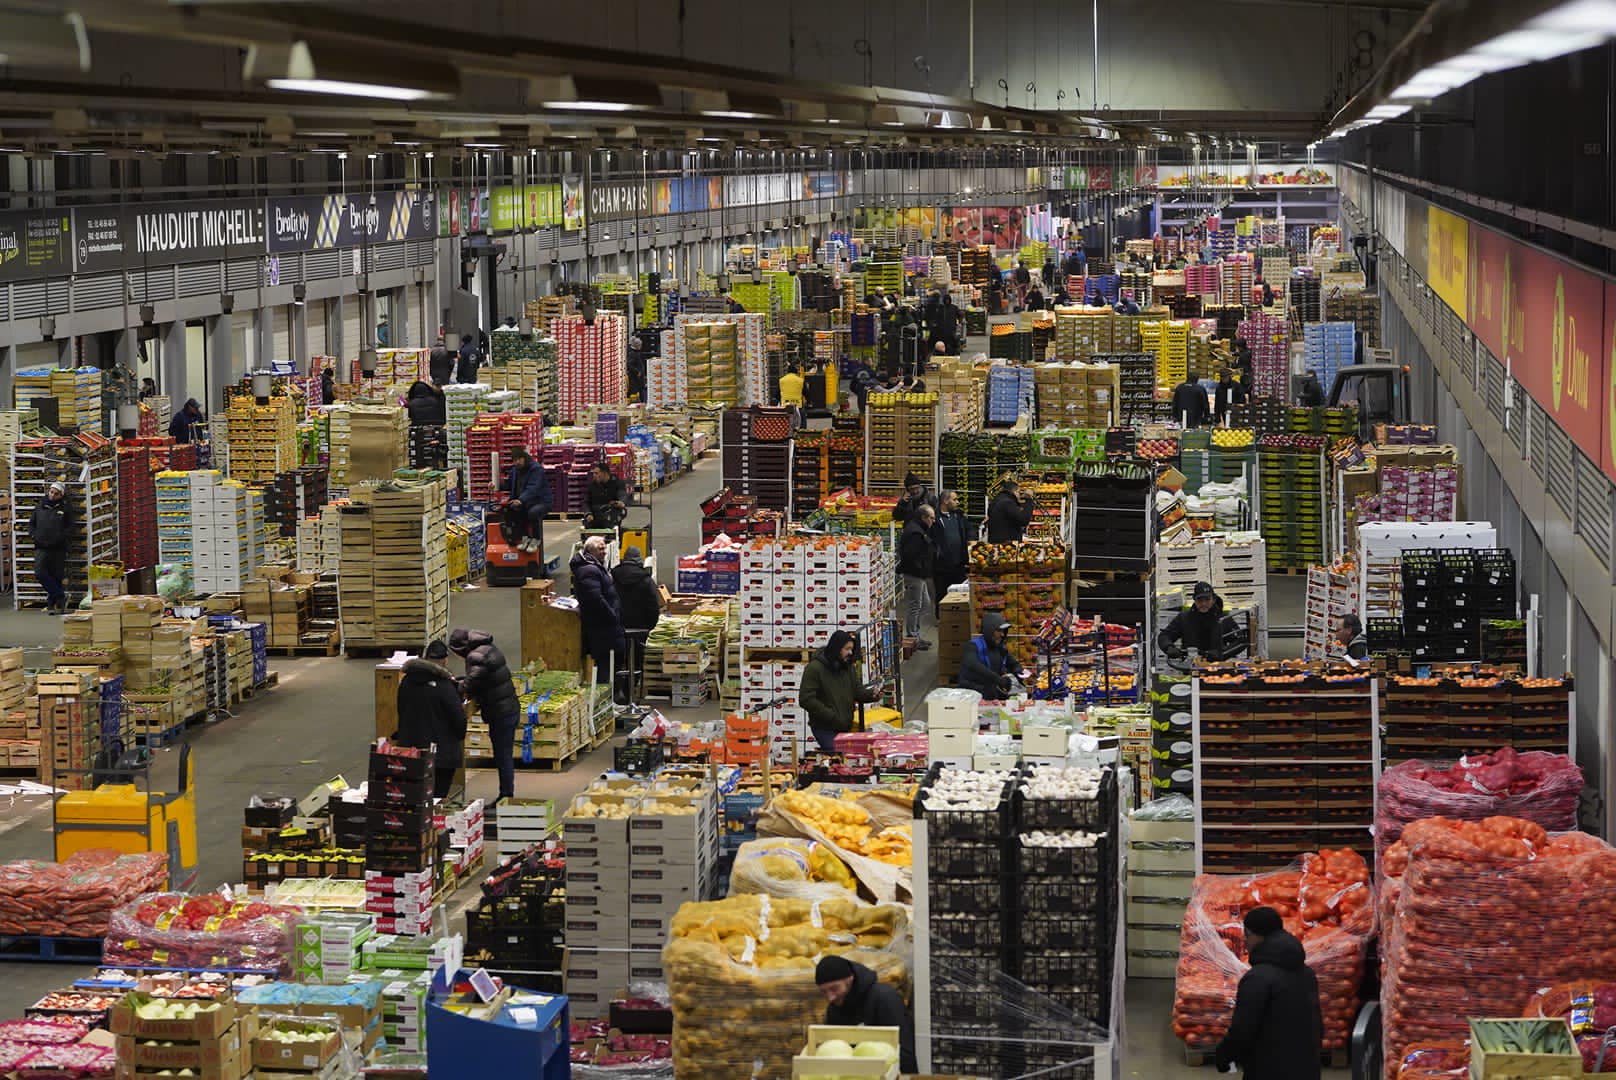 Spain’s non-EU fruit and veg on the rise while exports fall